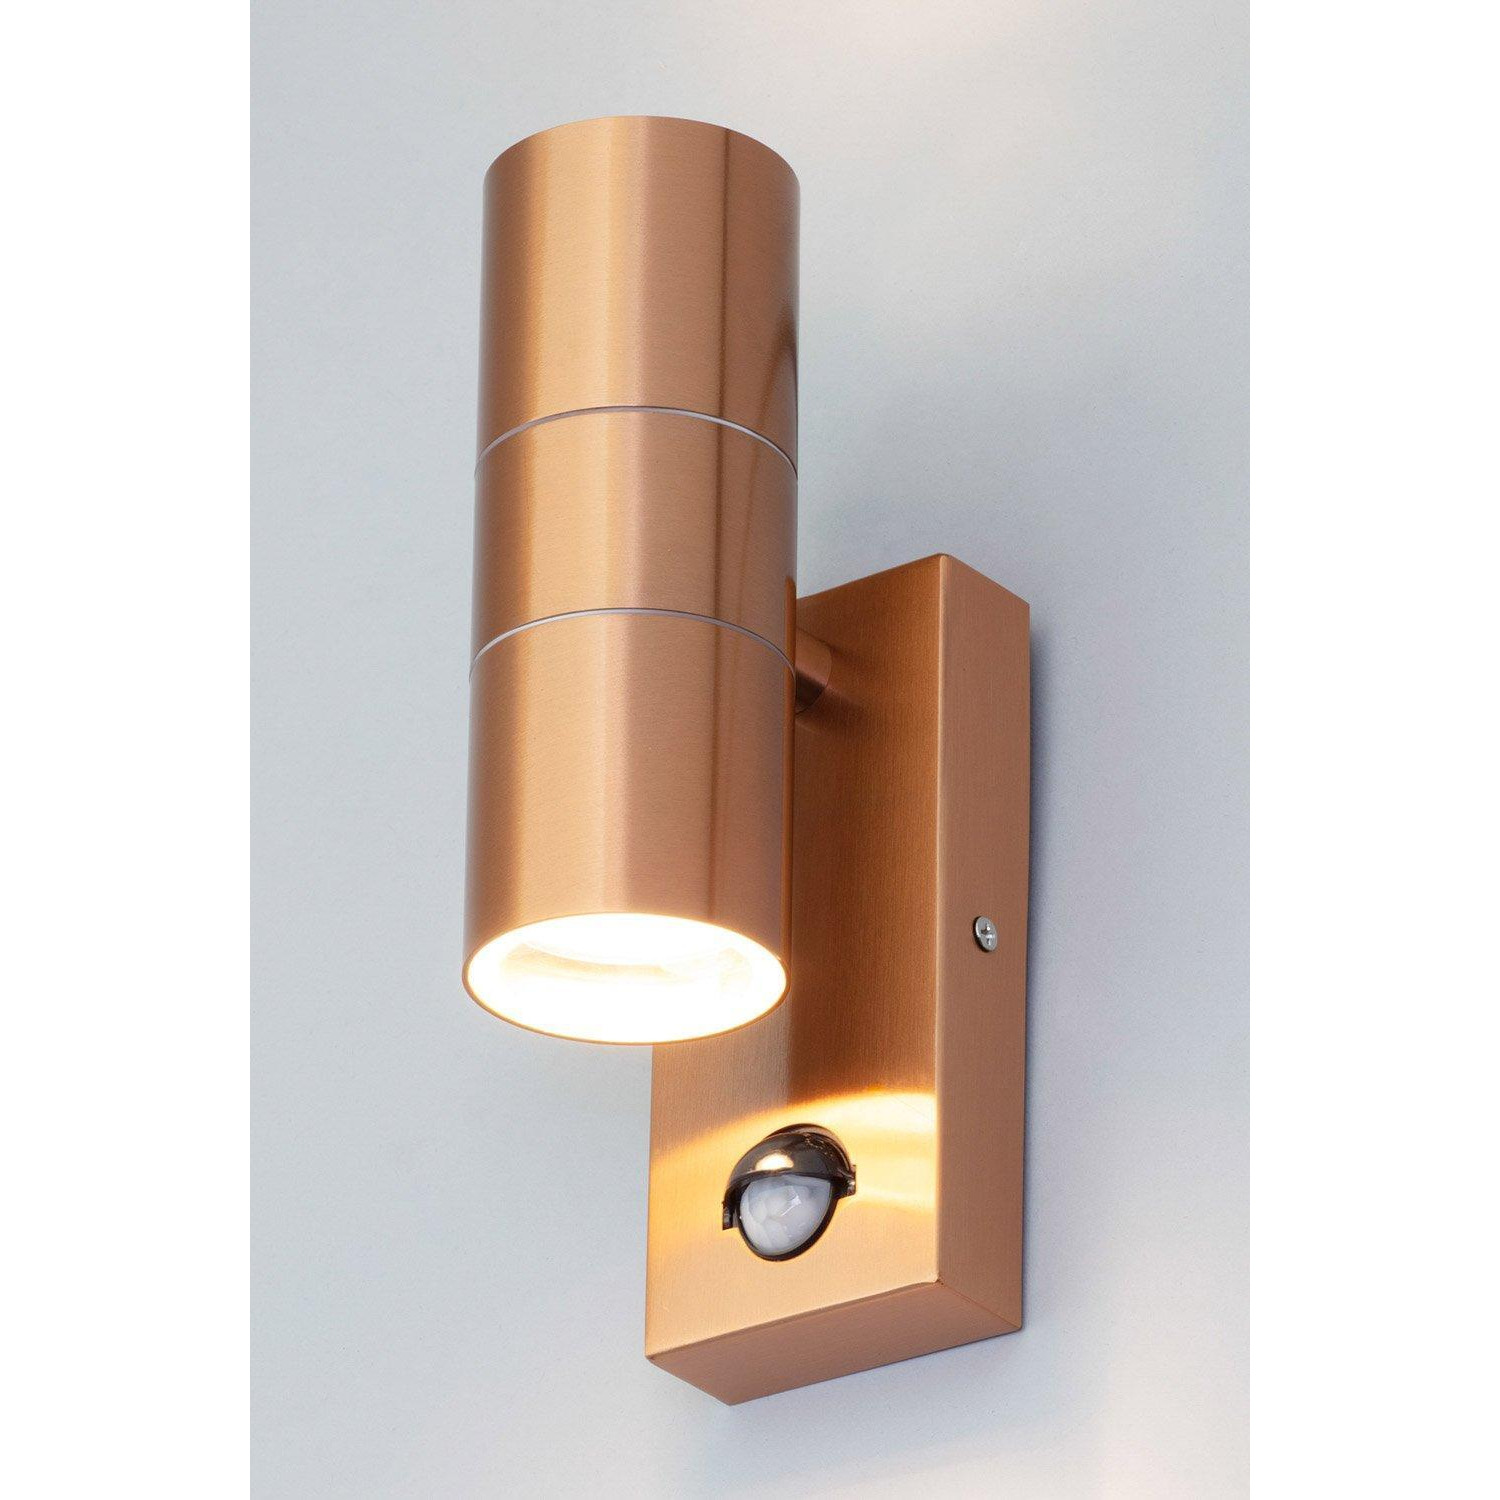 Jared Outdoor Wall Light with Sensor - image 1